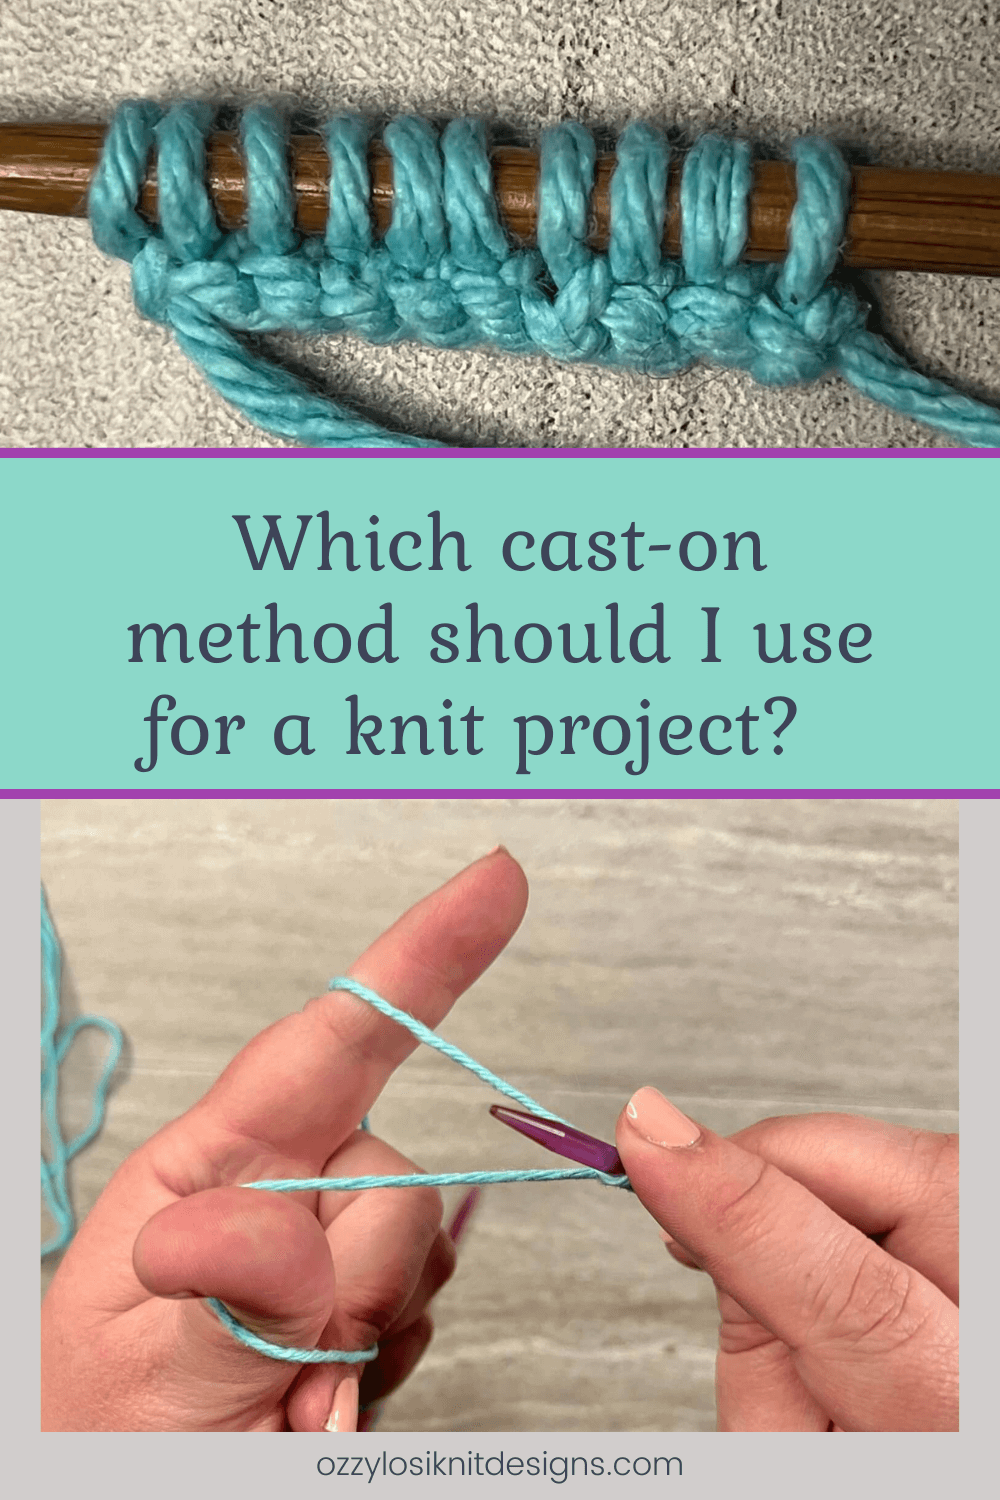 How will you cast-on knit project